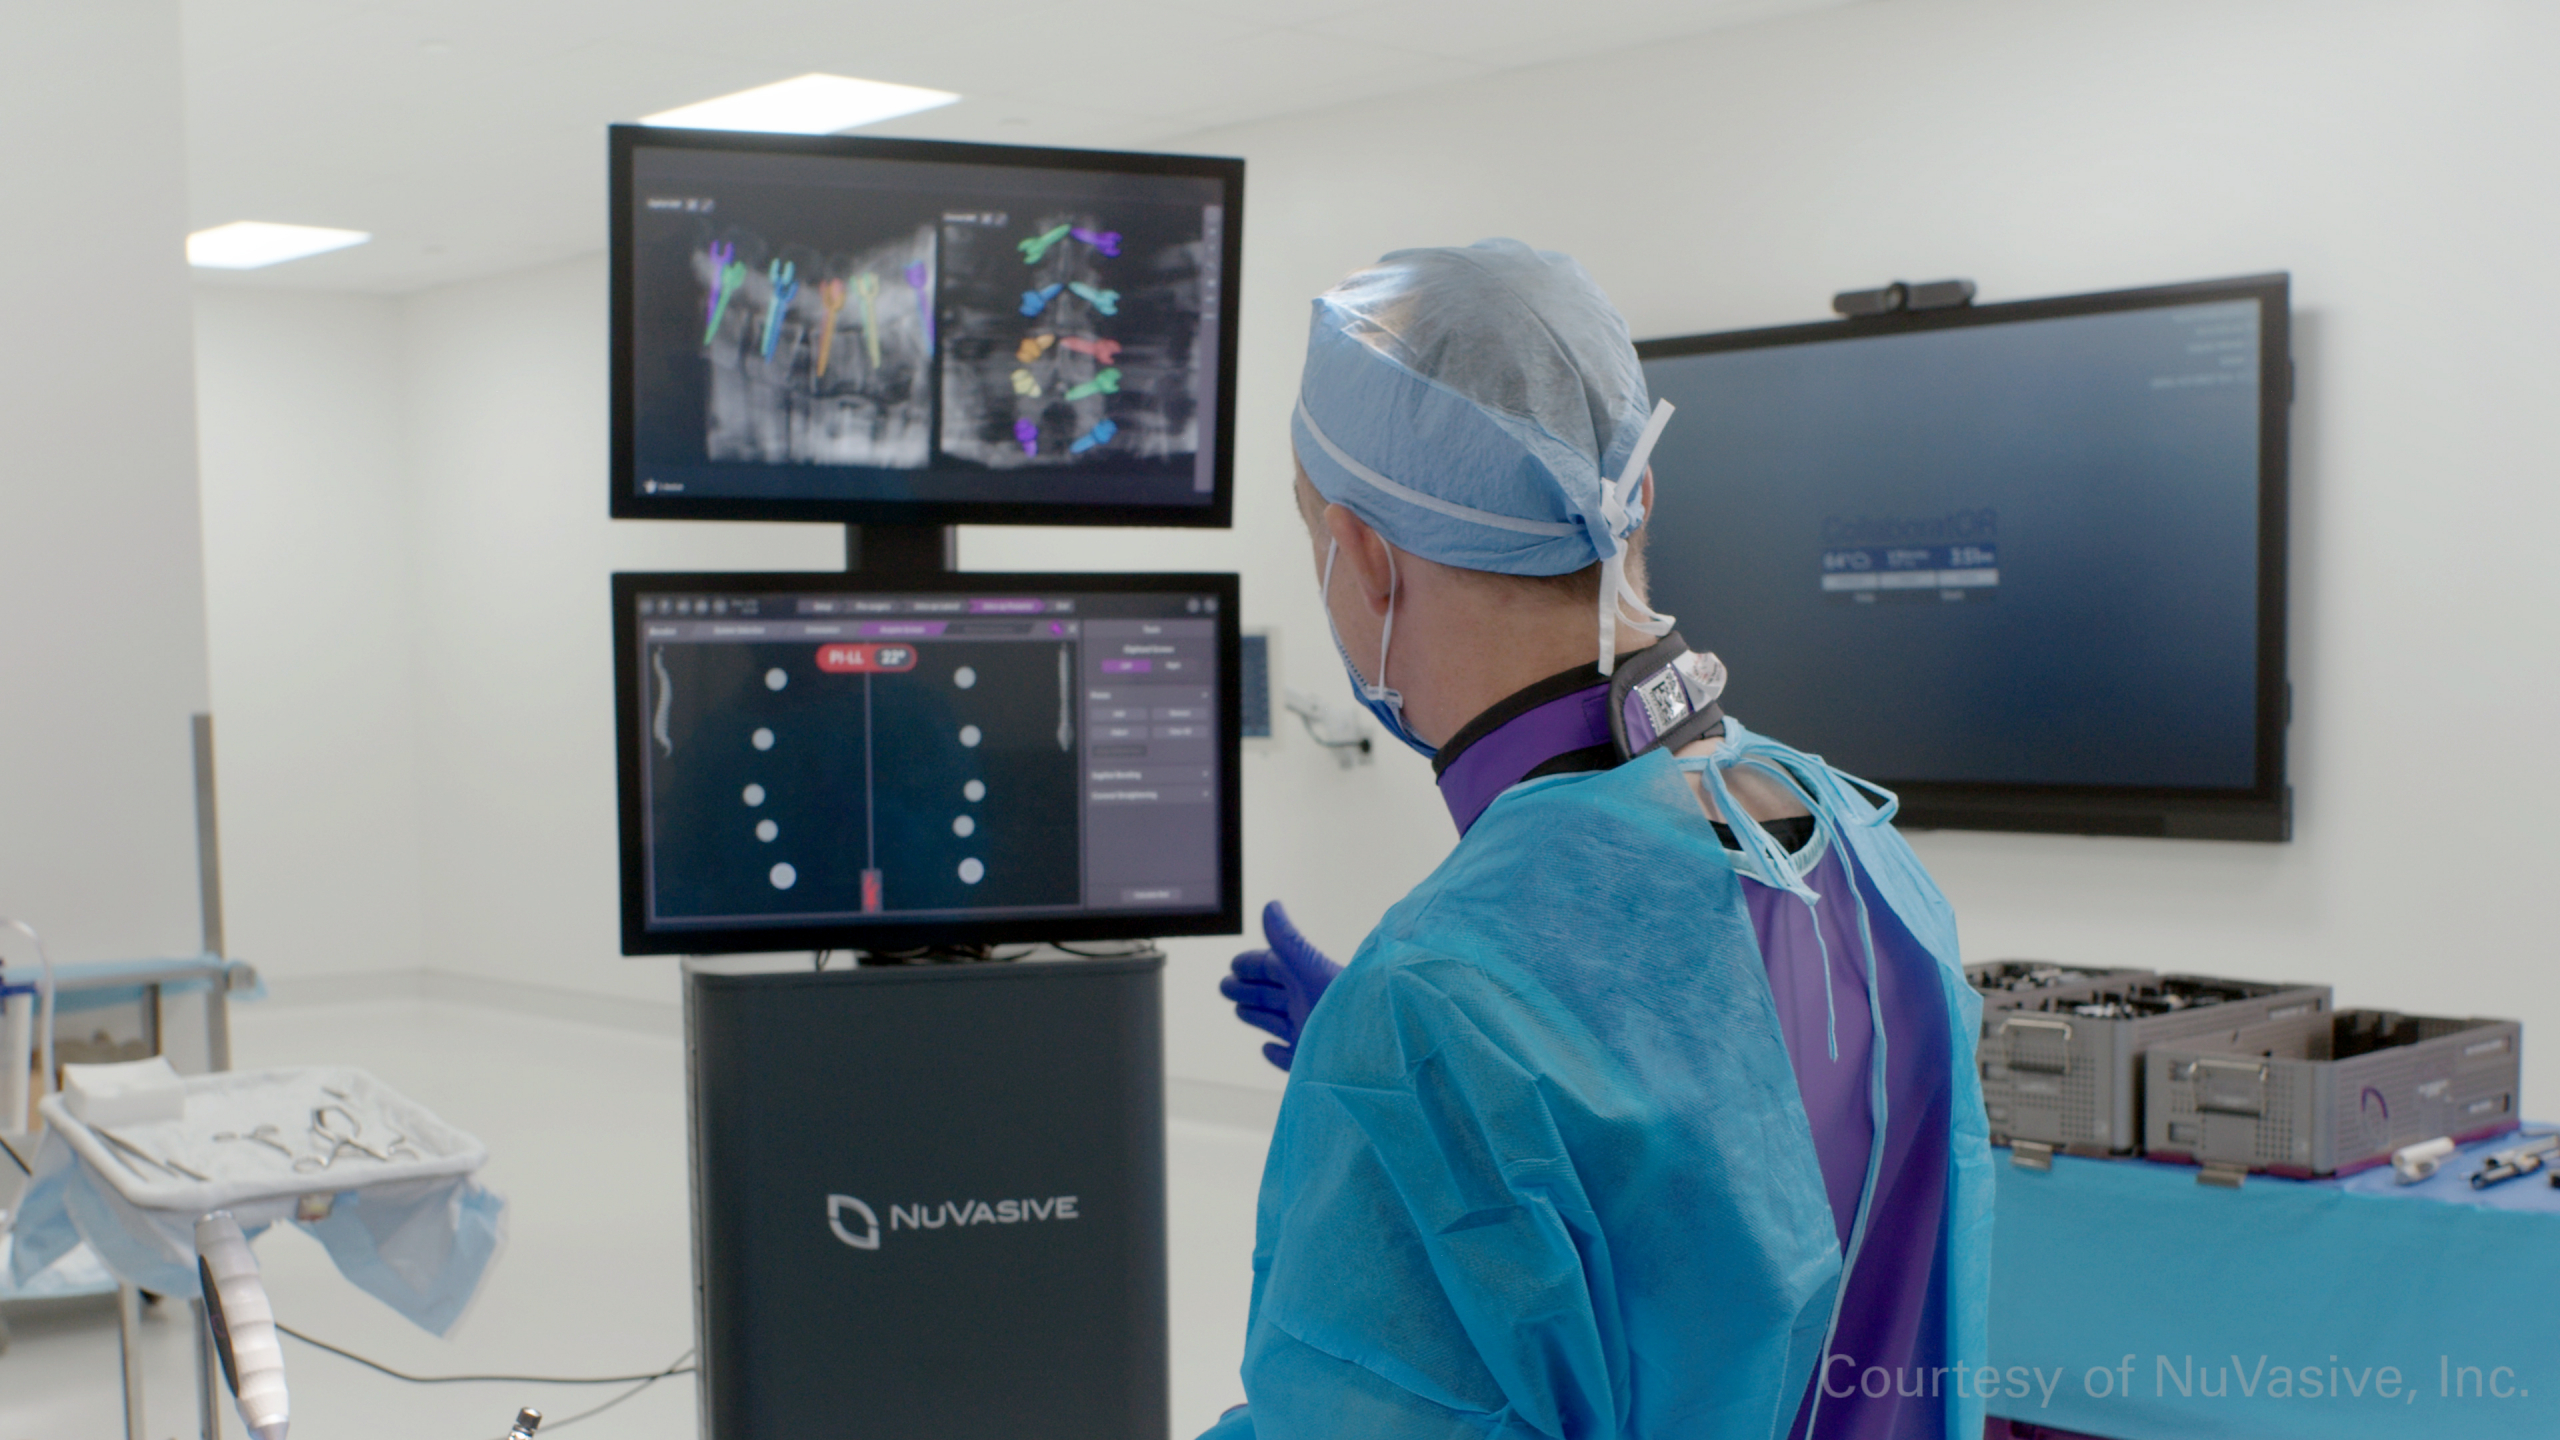 Meoclinic is the 1st private clinic in Germany with Pulse technology